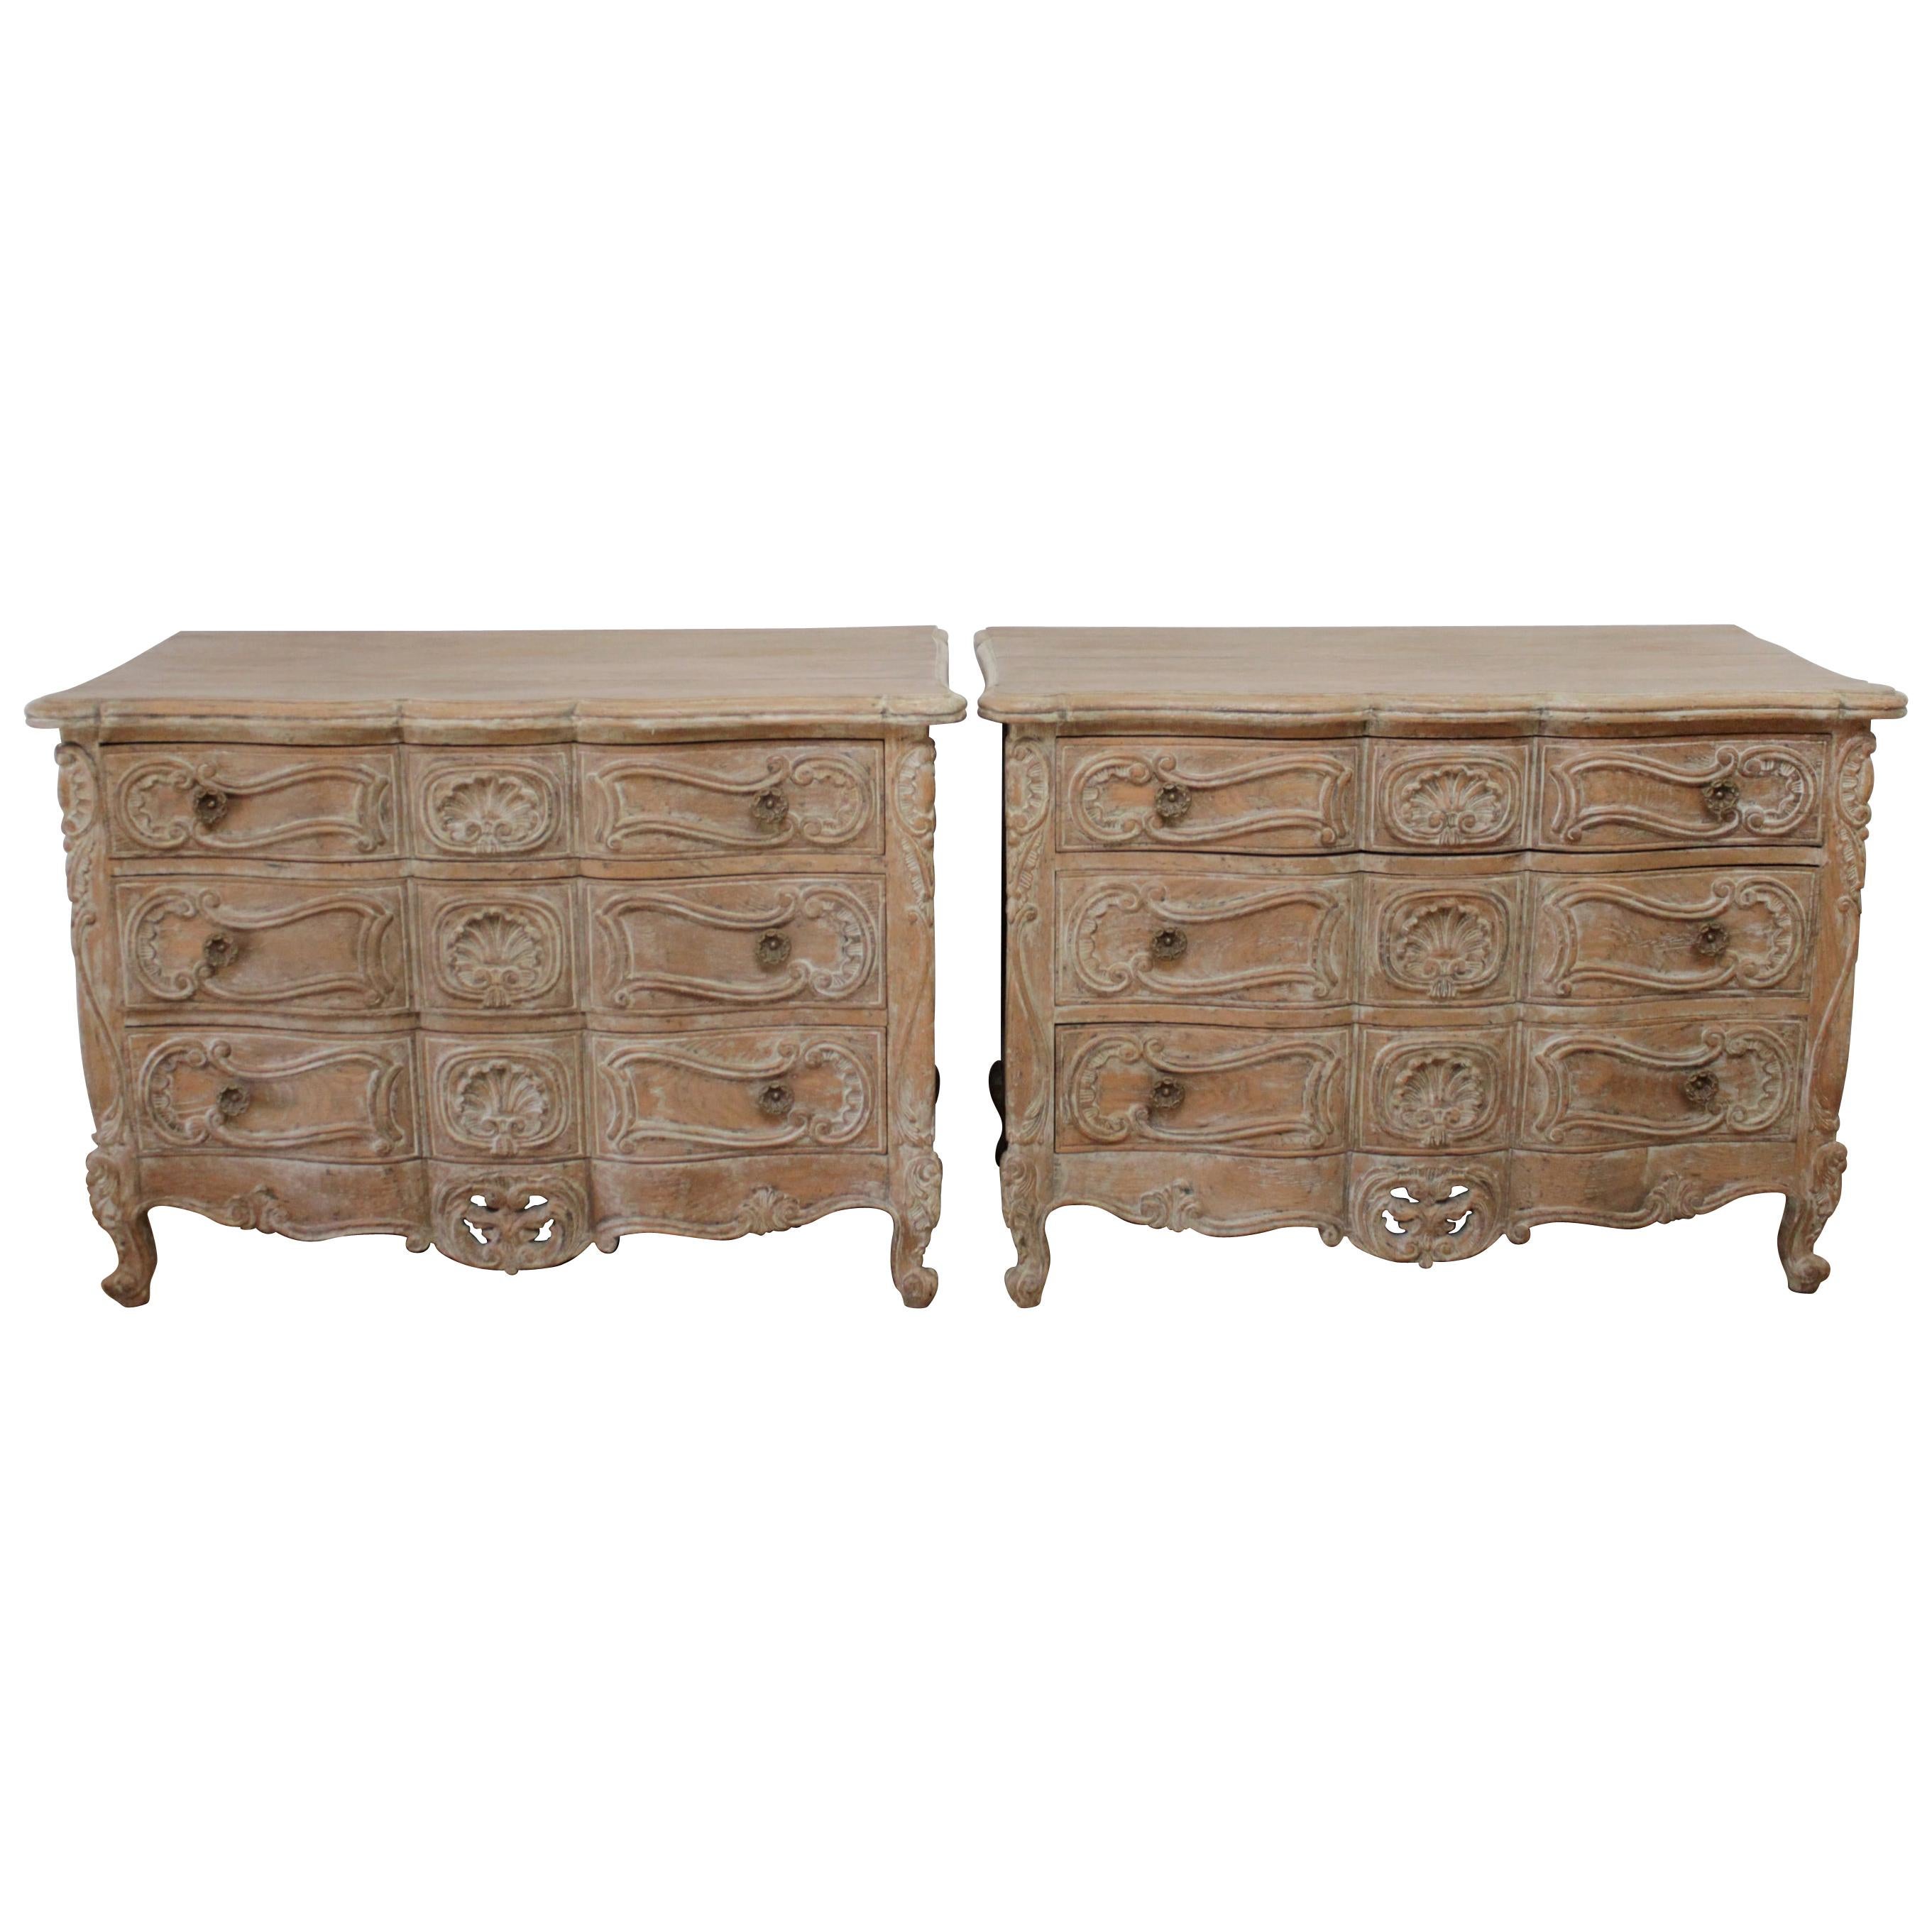 Vintage Pair of Pickled Carved Wood Nightstands Chest of Drawers